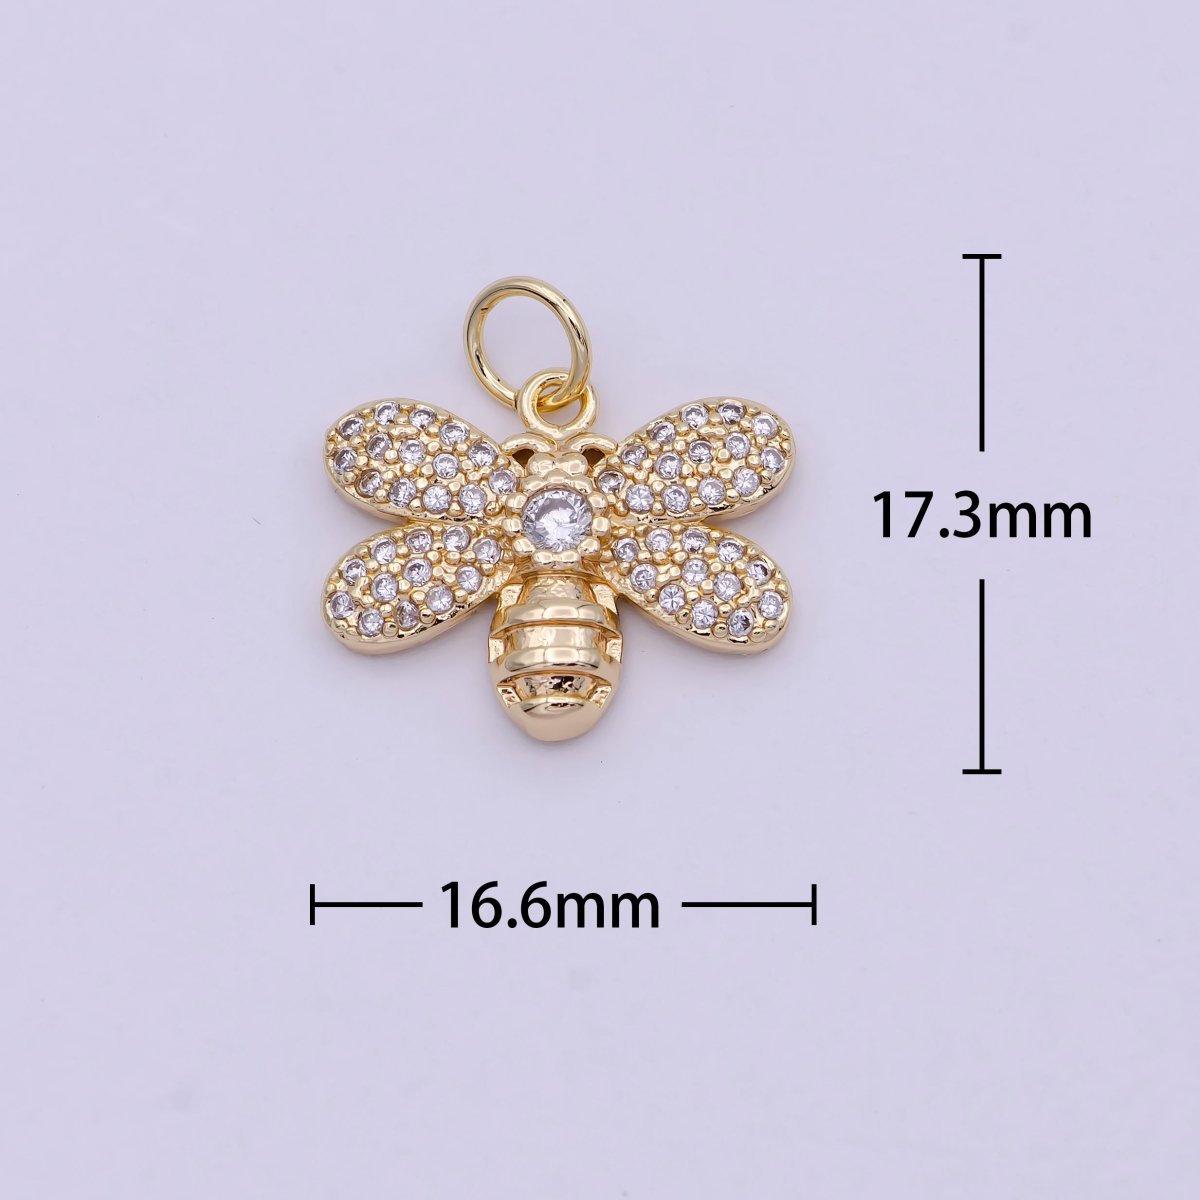 Micro Pave Bee Charms 24k Gold Filled Cubic insect charm for Bracelet Earring Necklace Component C-762 - DLUXCA